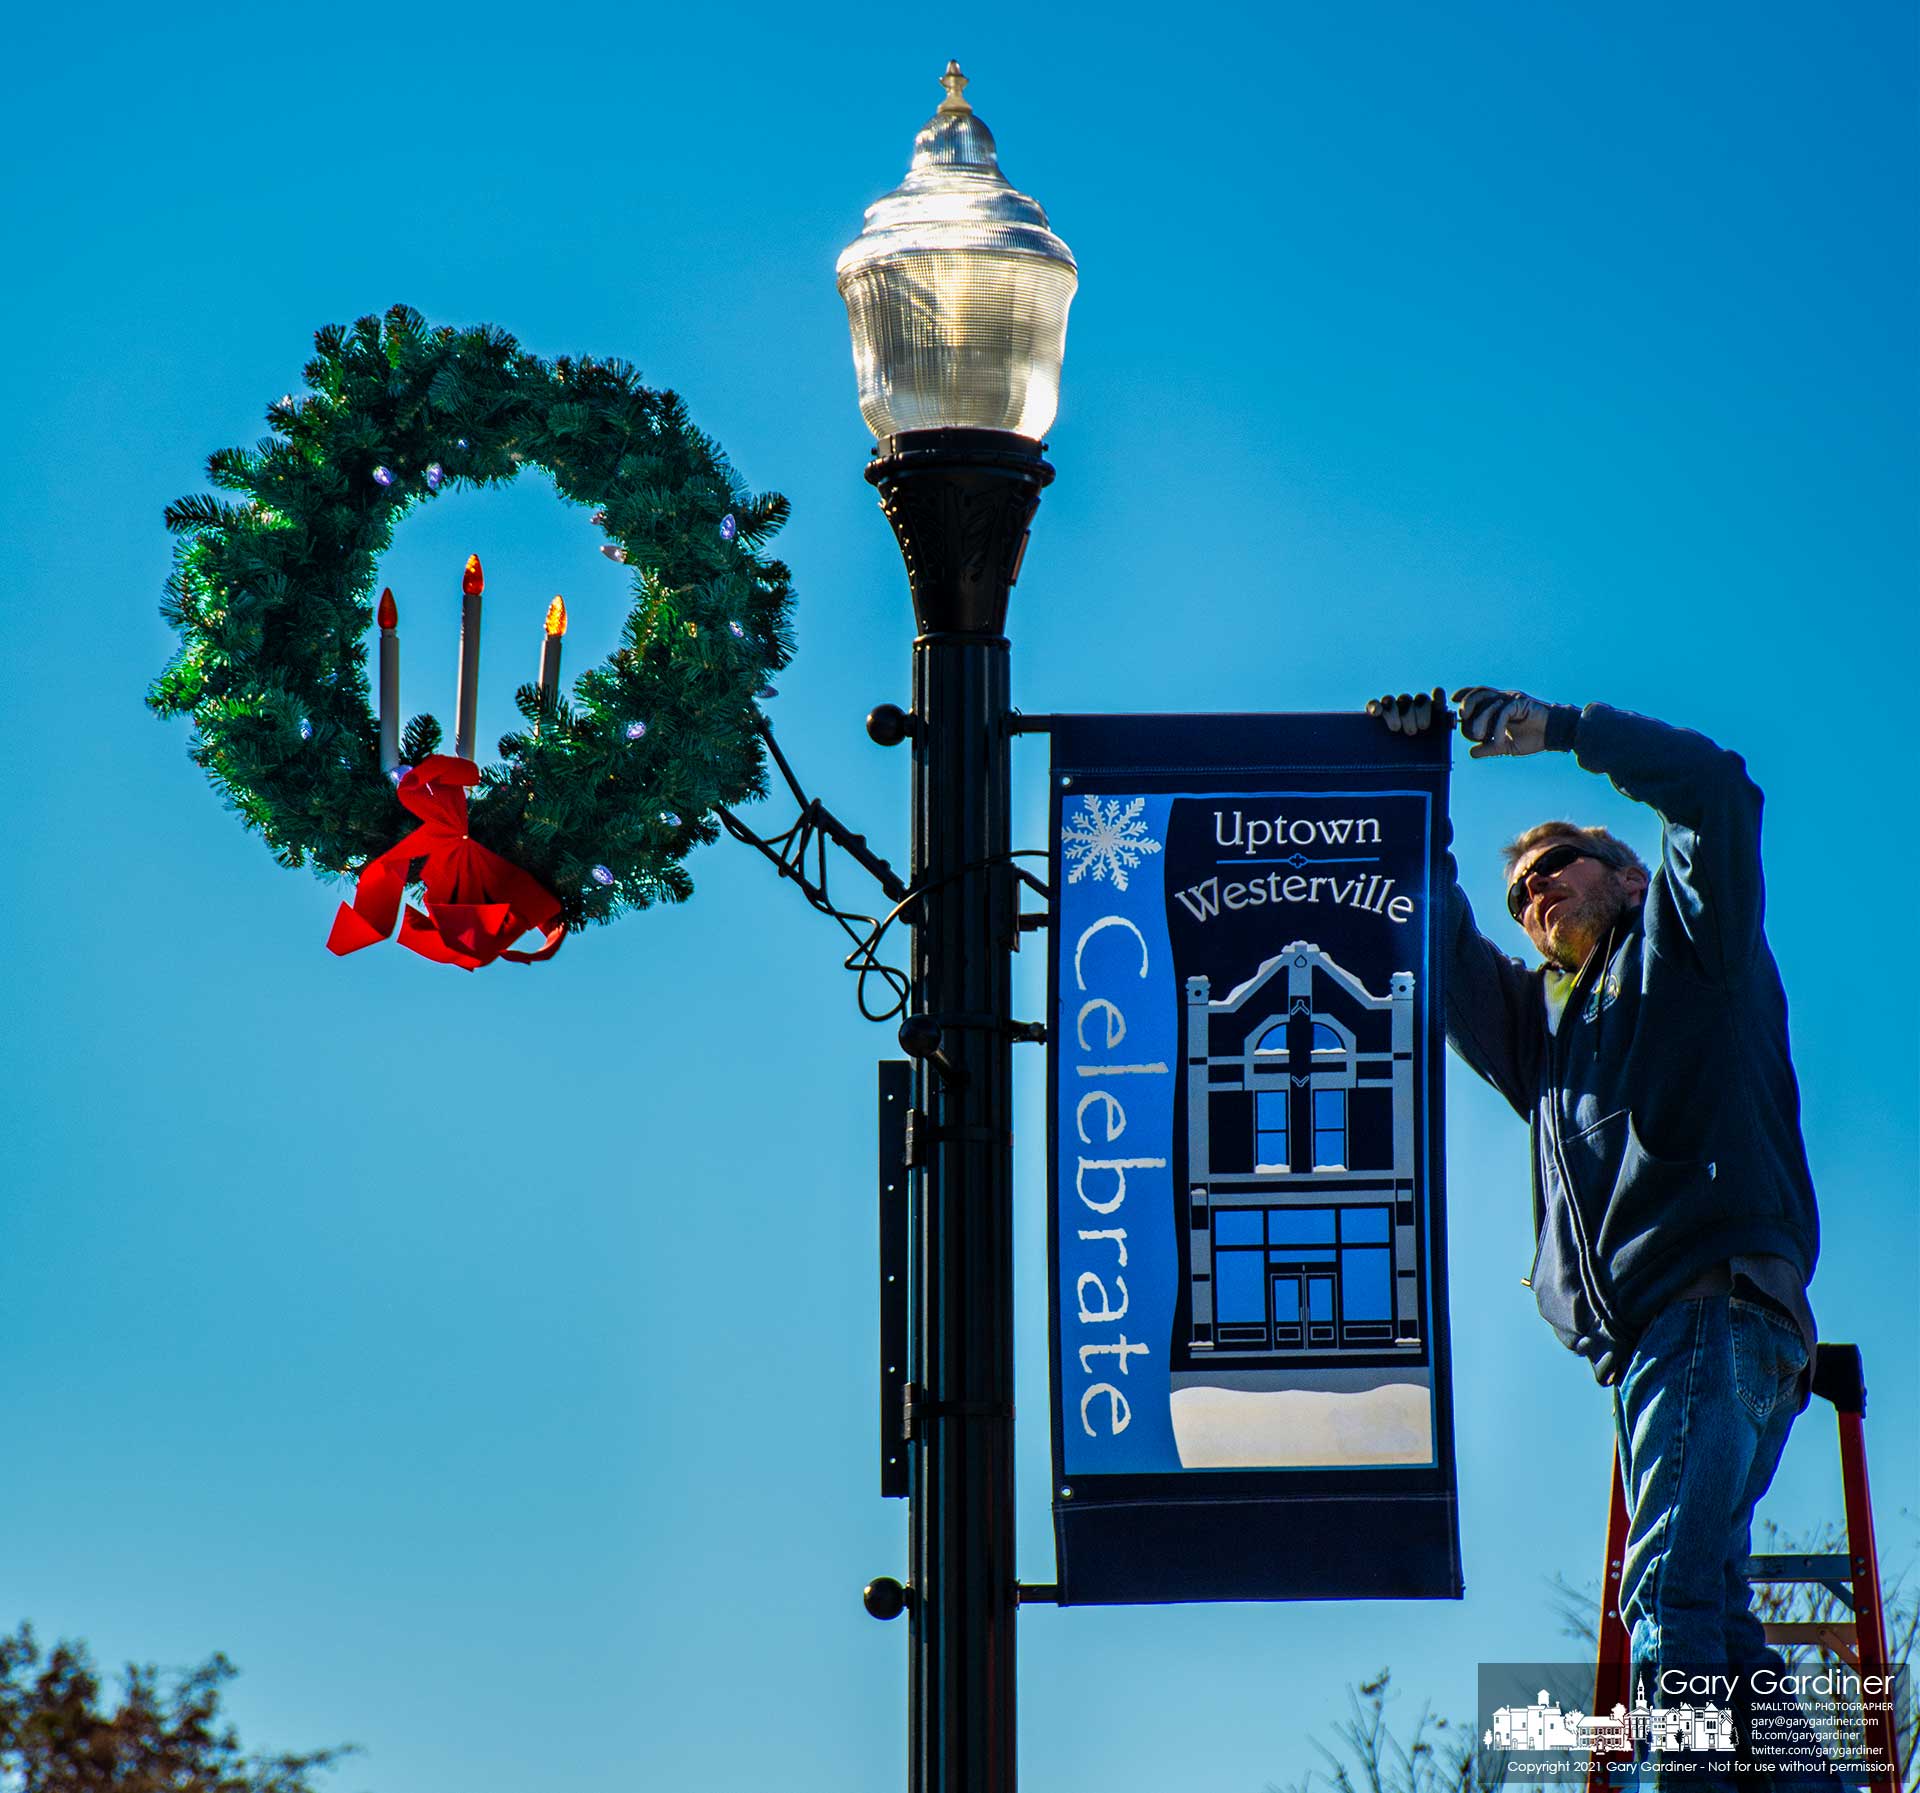 City electric workers install wreaths and holiday banners on streetlights in Uptown Westerville preparing the city for Friday's tree lighting ceremony. My Final Photo for Nov. 30, 2021.